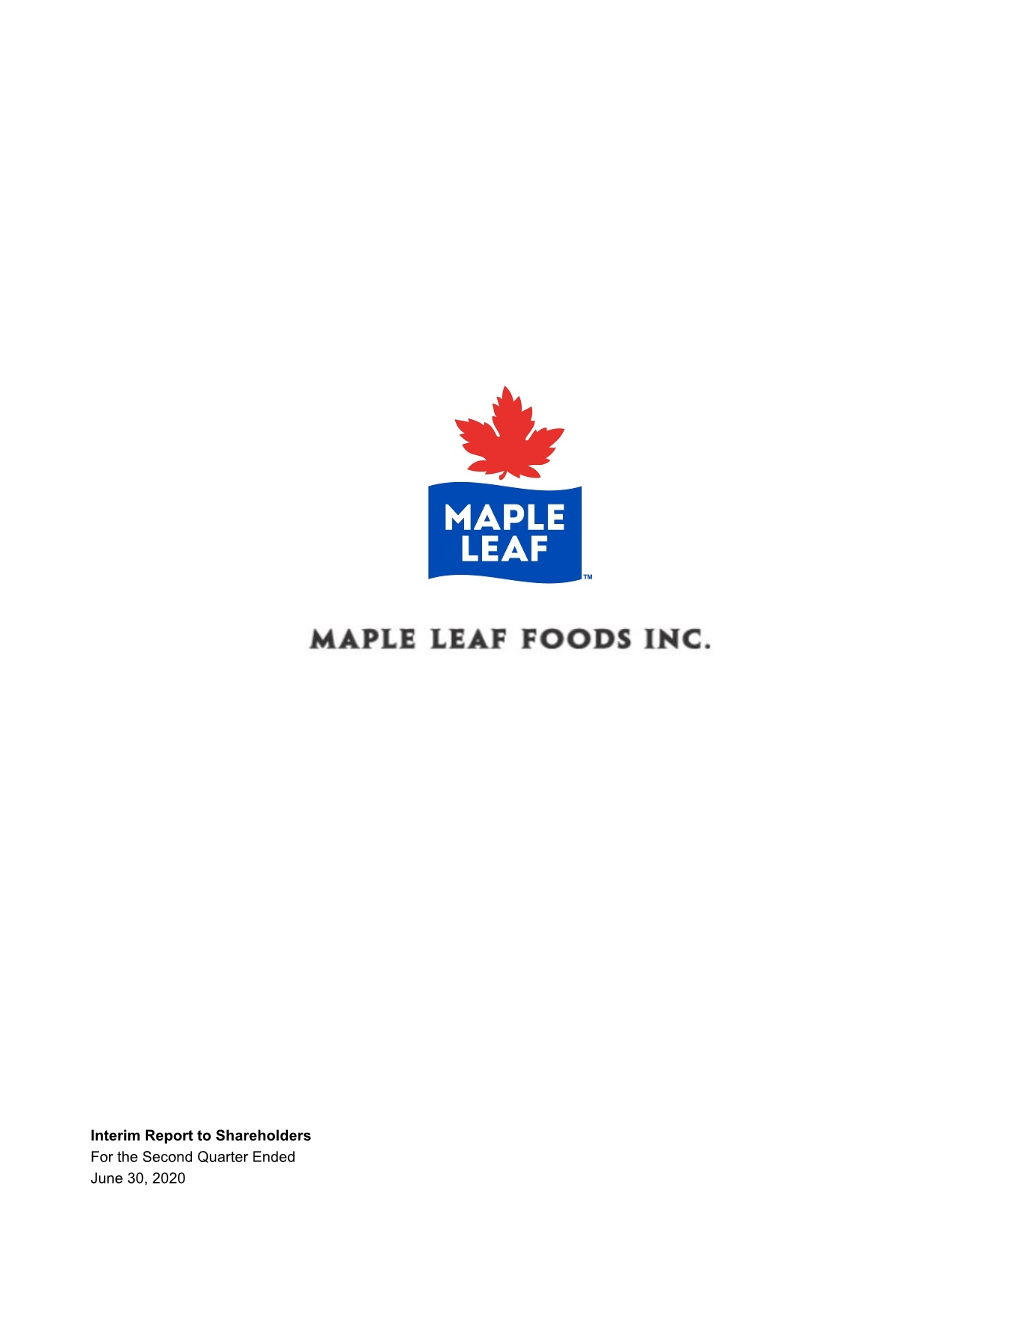 Maple Leaf Foods Q2 2020 Report to Shareholders